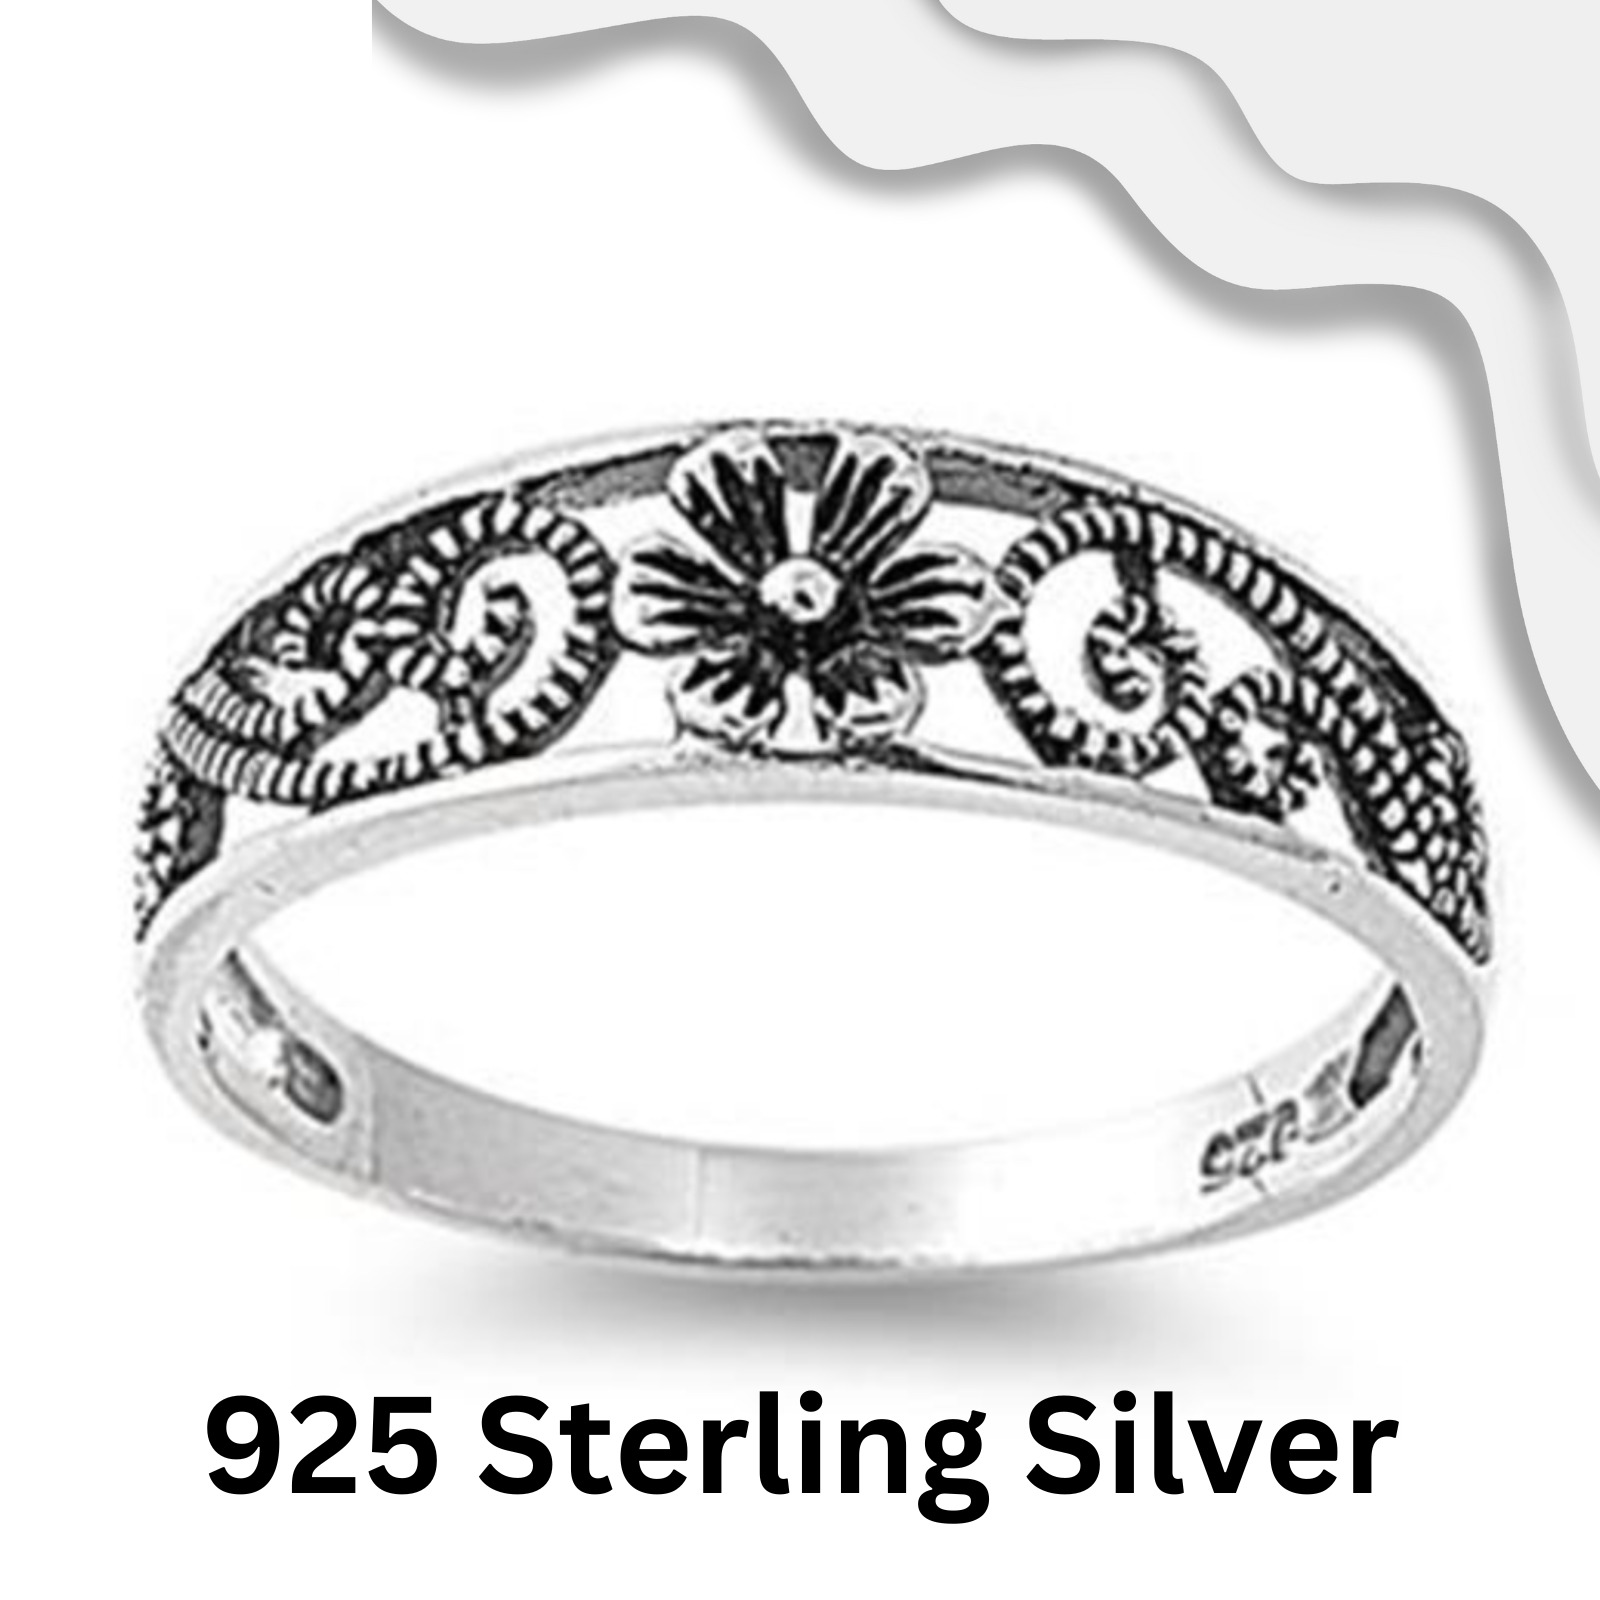 DAISY RING ~ Genuine SOLID STERLING SILVER RING ~ Size 6 / M